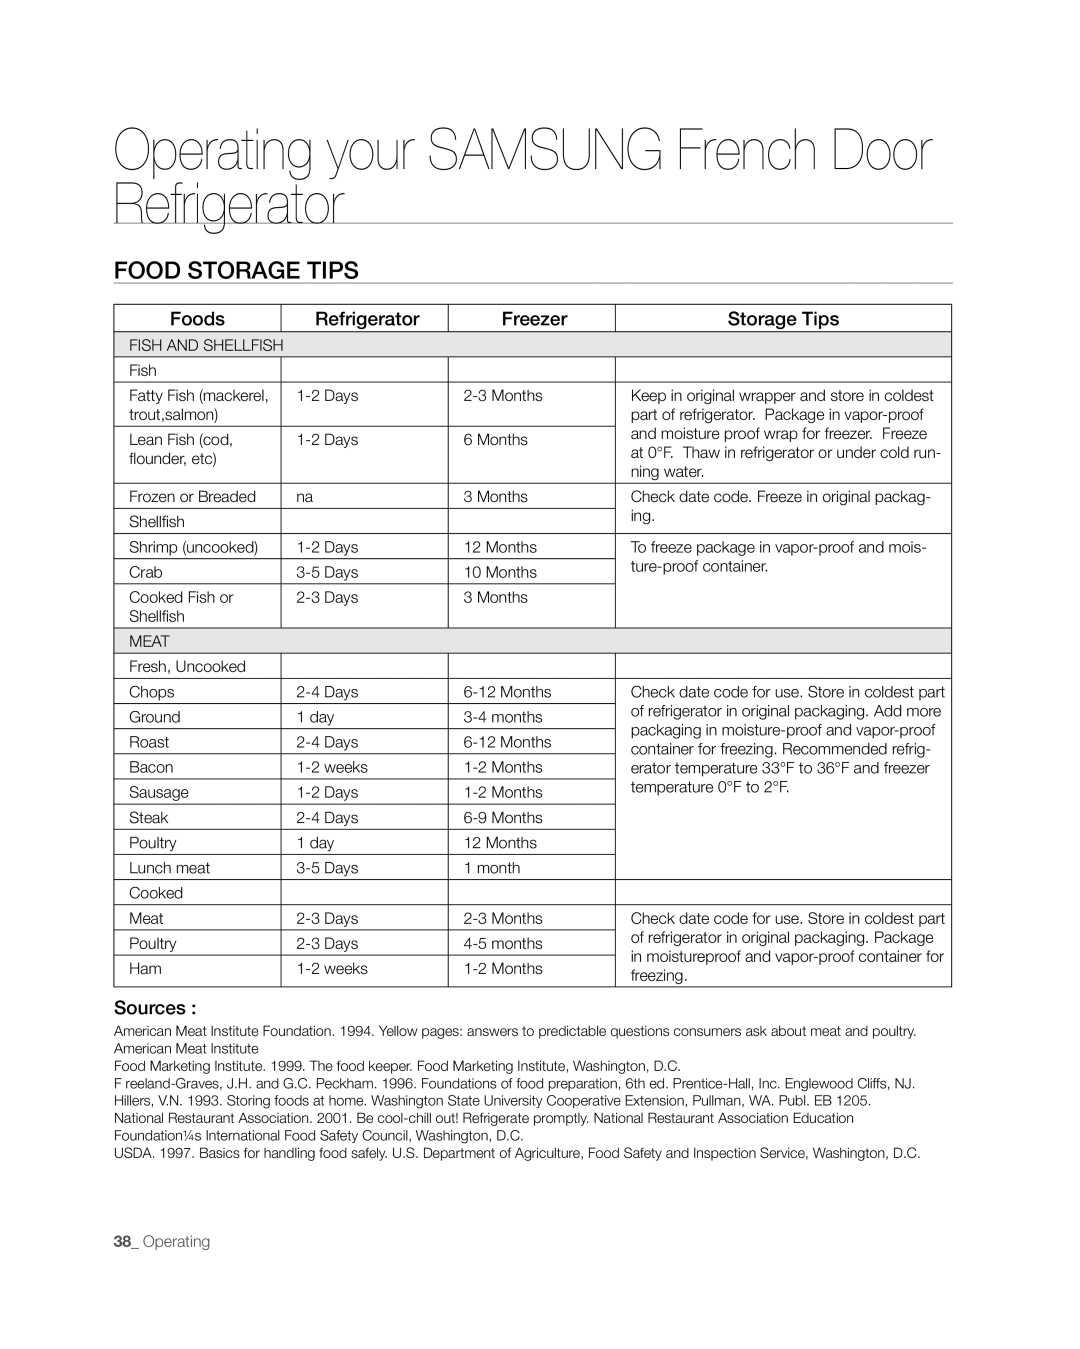 Samsung RFG297AAWP user manual Operating your SAMSUNG French Door Refrigerator, Food Storage Tips, Foods, Freezer, Sources 